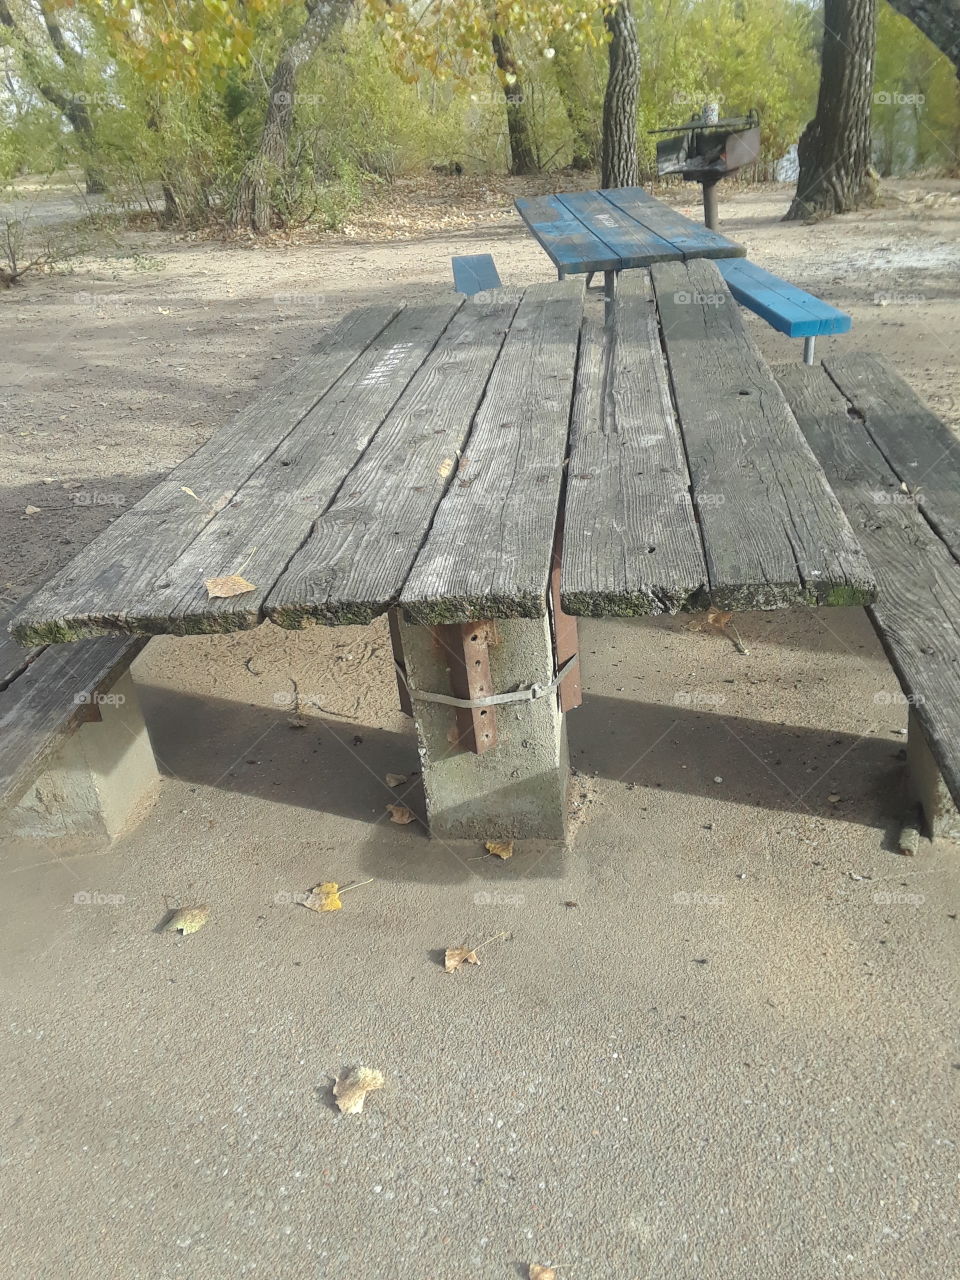 Park Picnic Benches Wooden